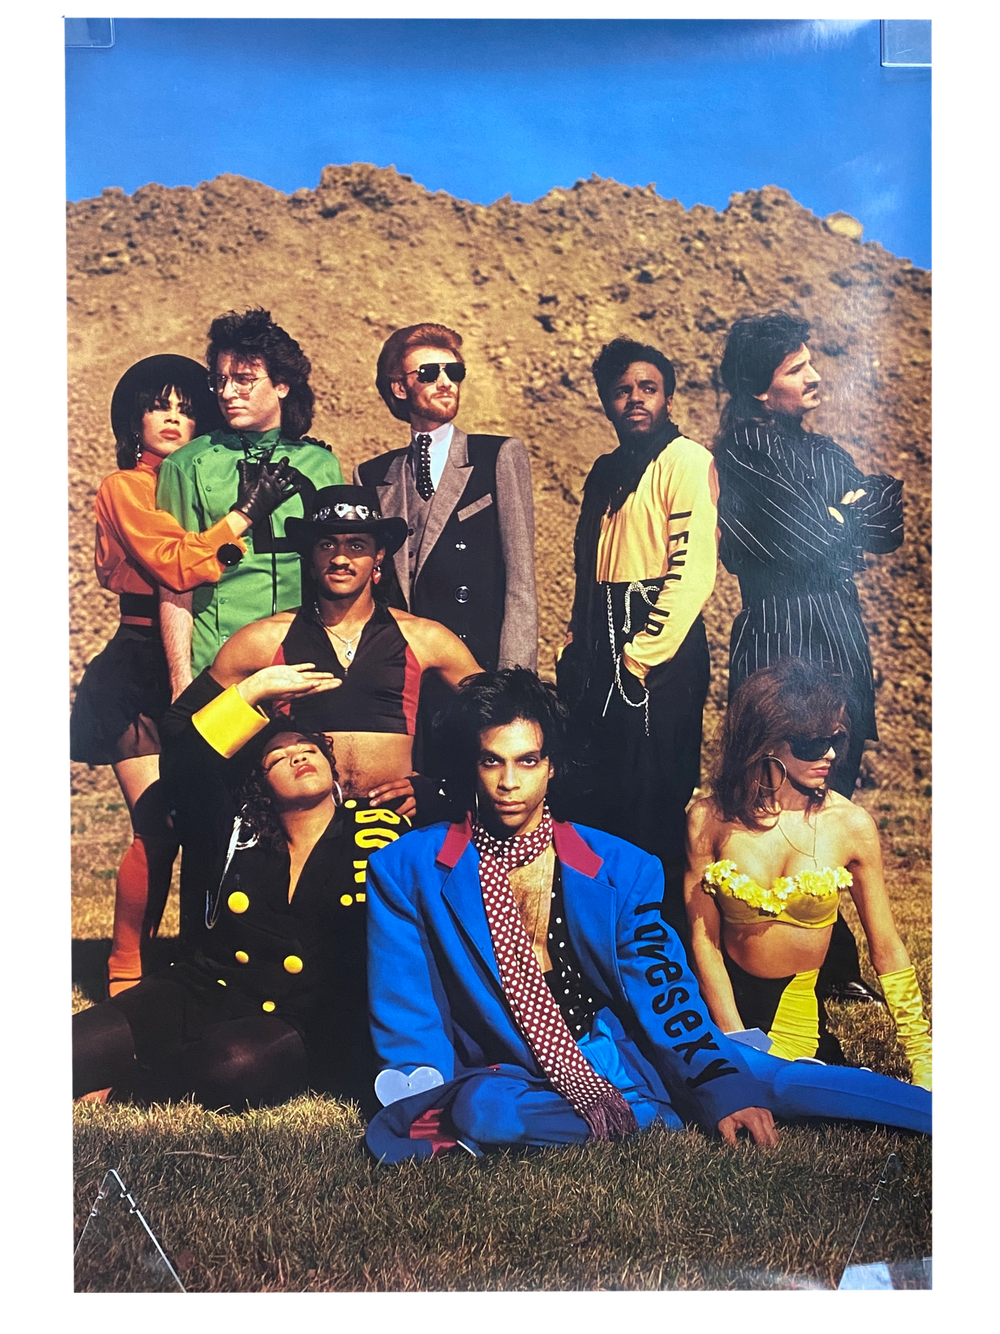 Prince – Official Tour Poster Lovesexy Band '88  EX CONDITION